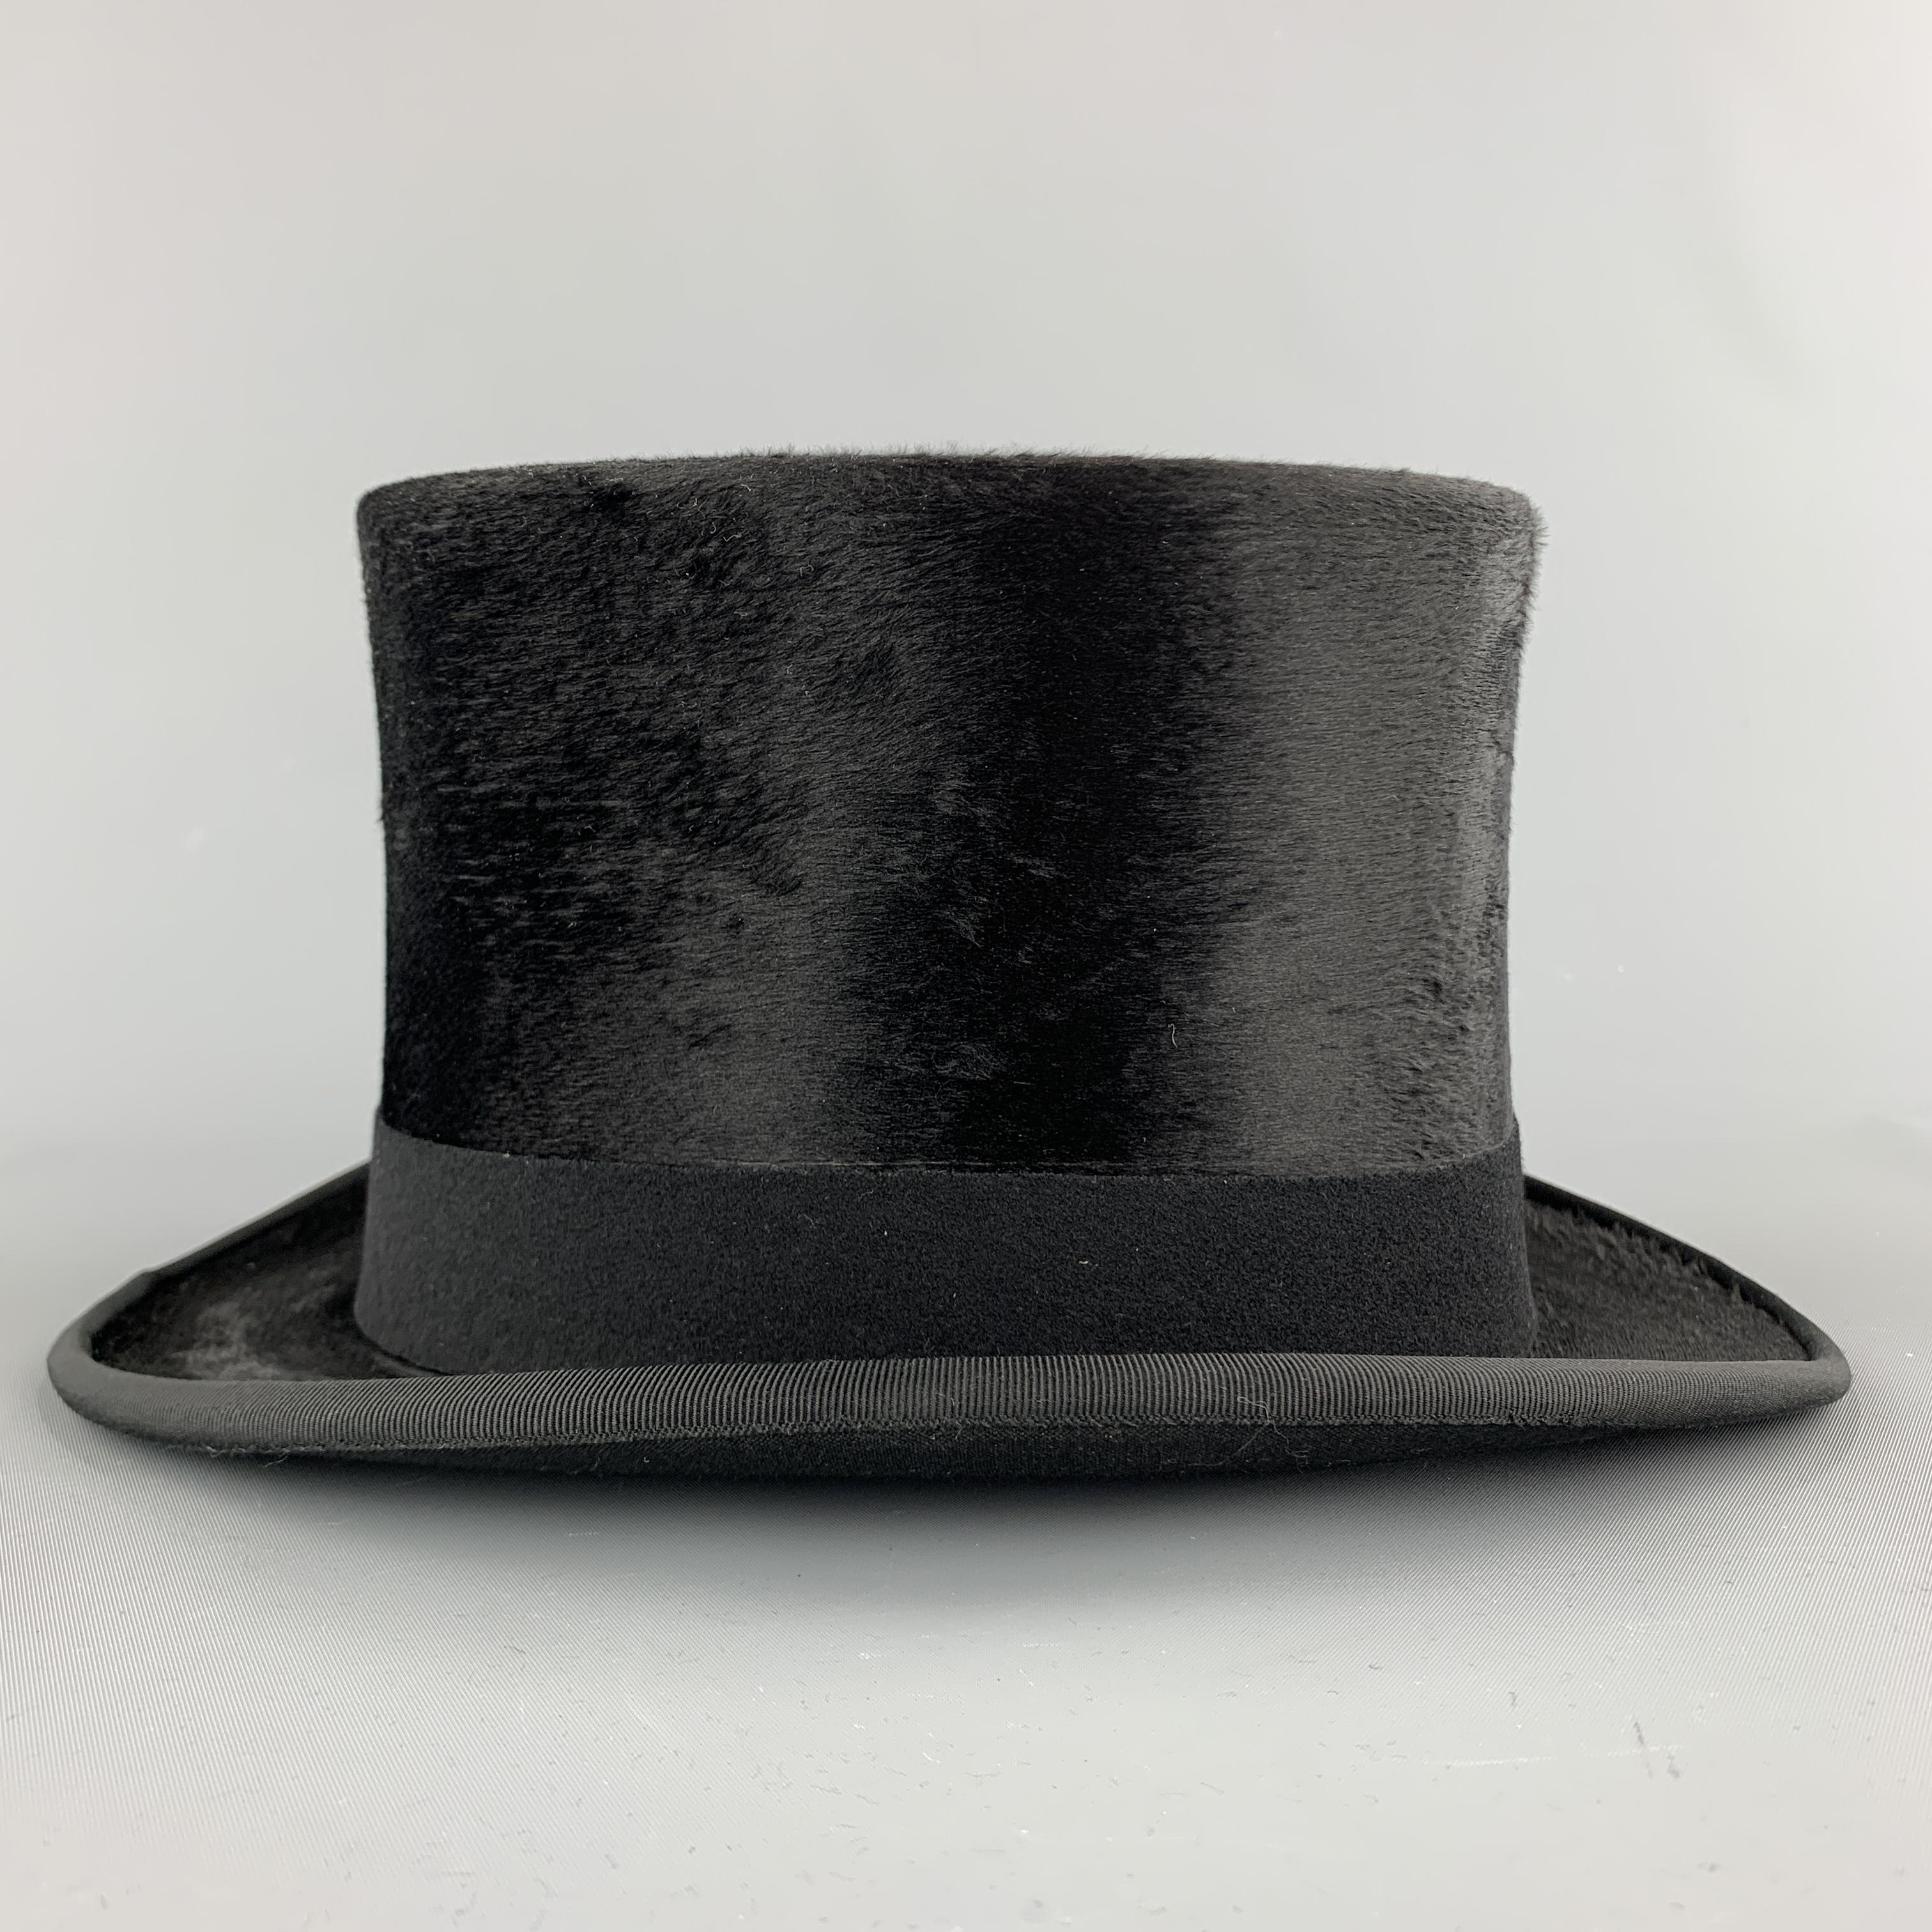 town shell high crown top hat